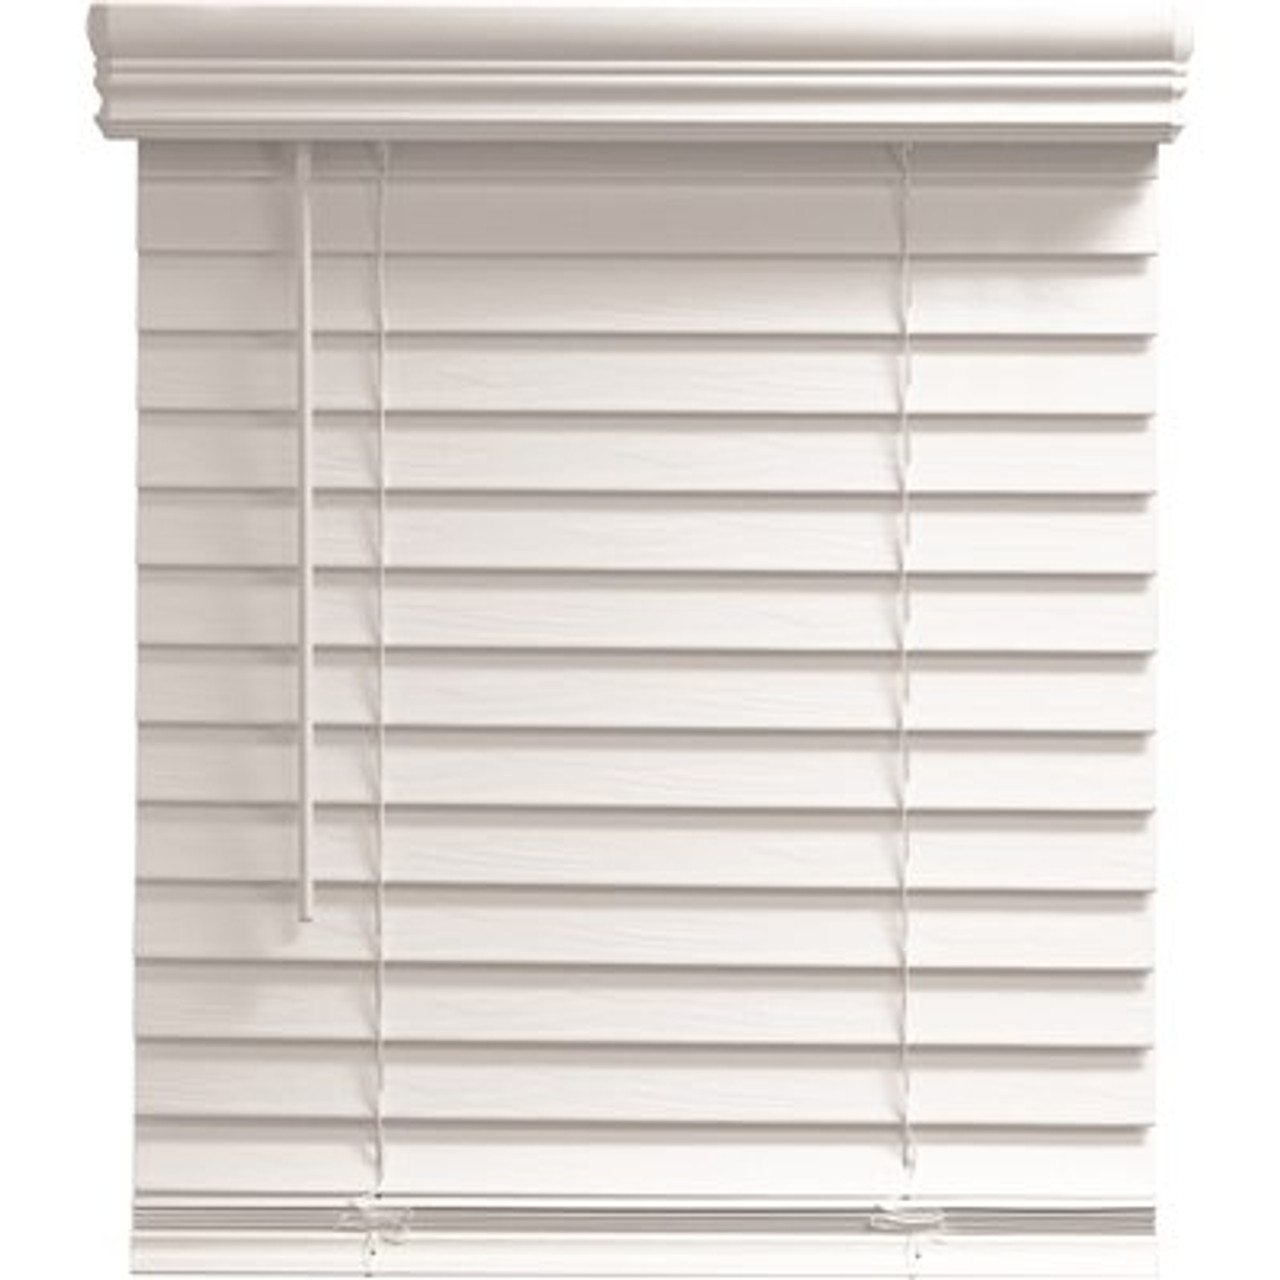 Champion TruTouch 35x60" Cordless 2" Faux Wood Blind White